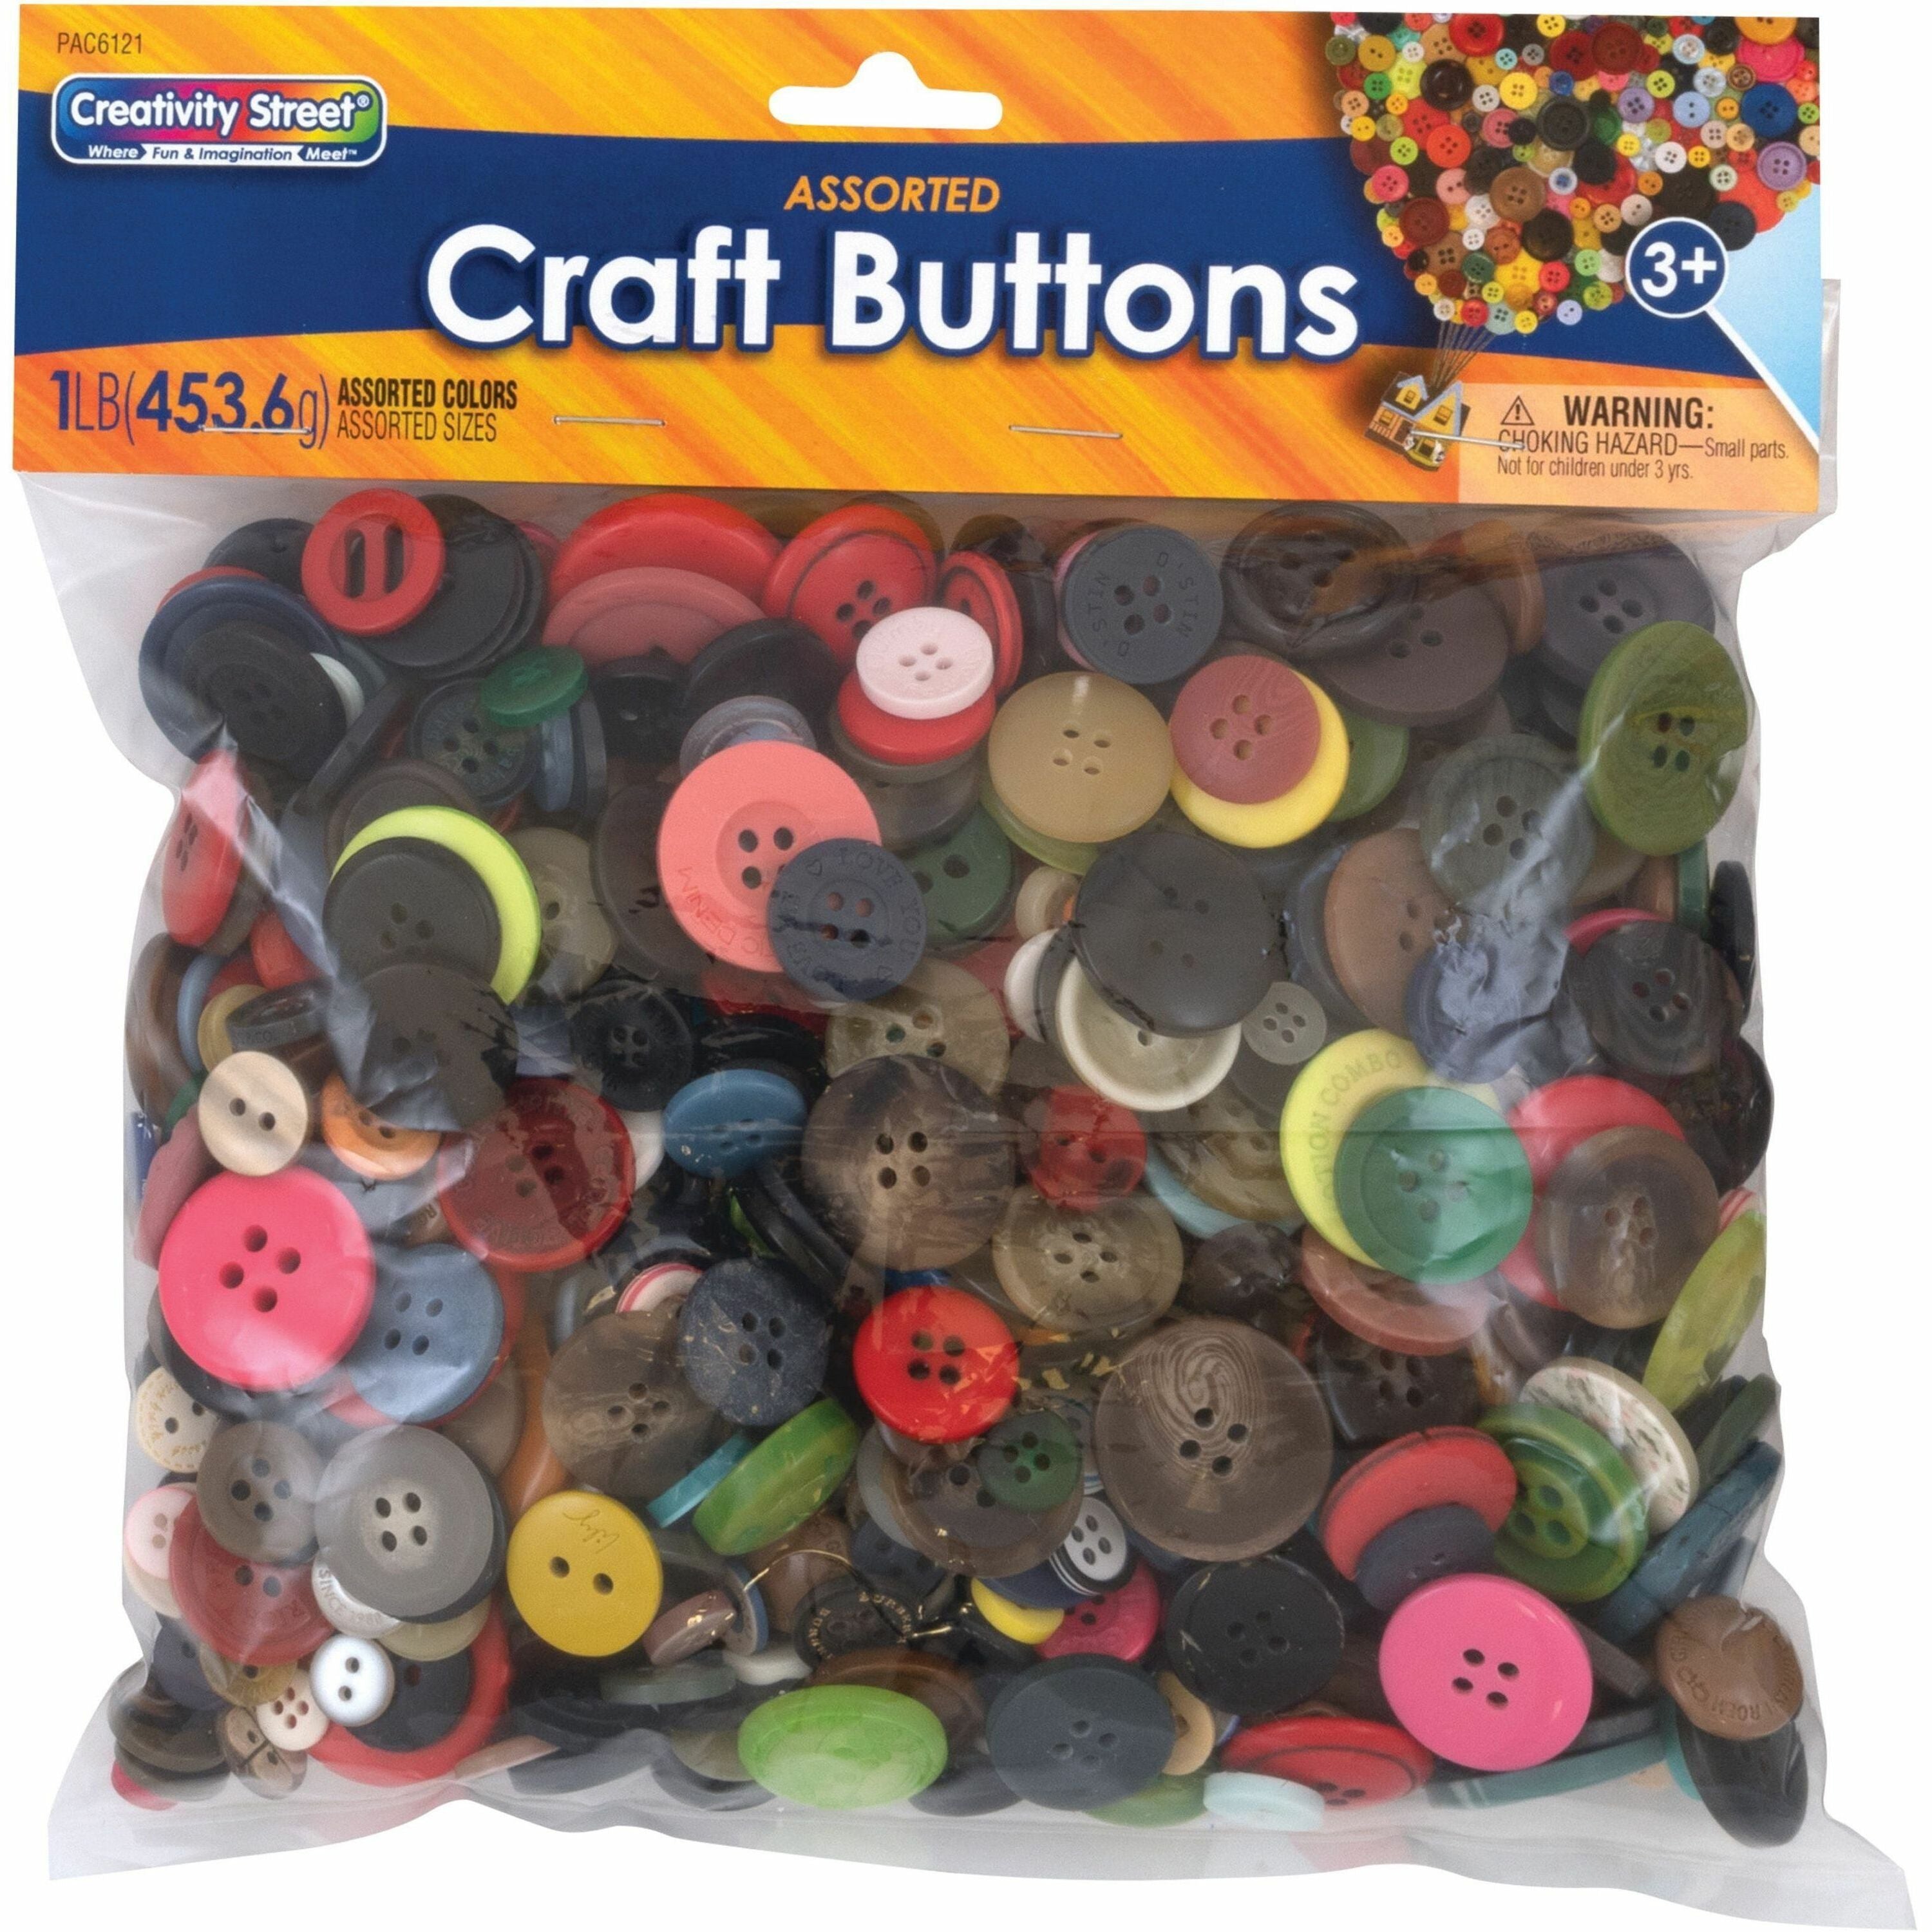 creativity-street-craft-button-variety-pack-craft-classroom-activities-collage-decoration-mask-puppet-toy-1-pack-assorted_pac6121 - 1